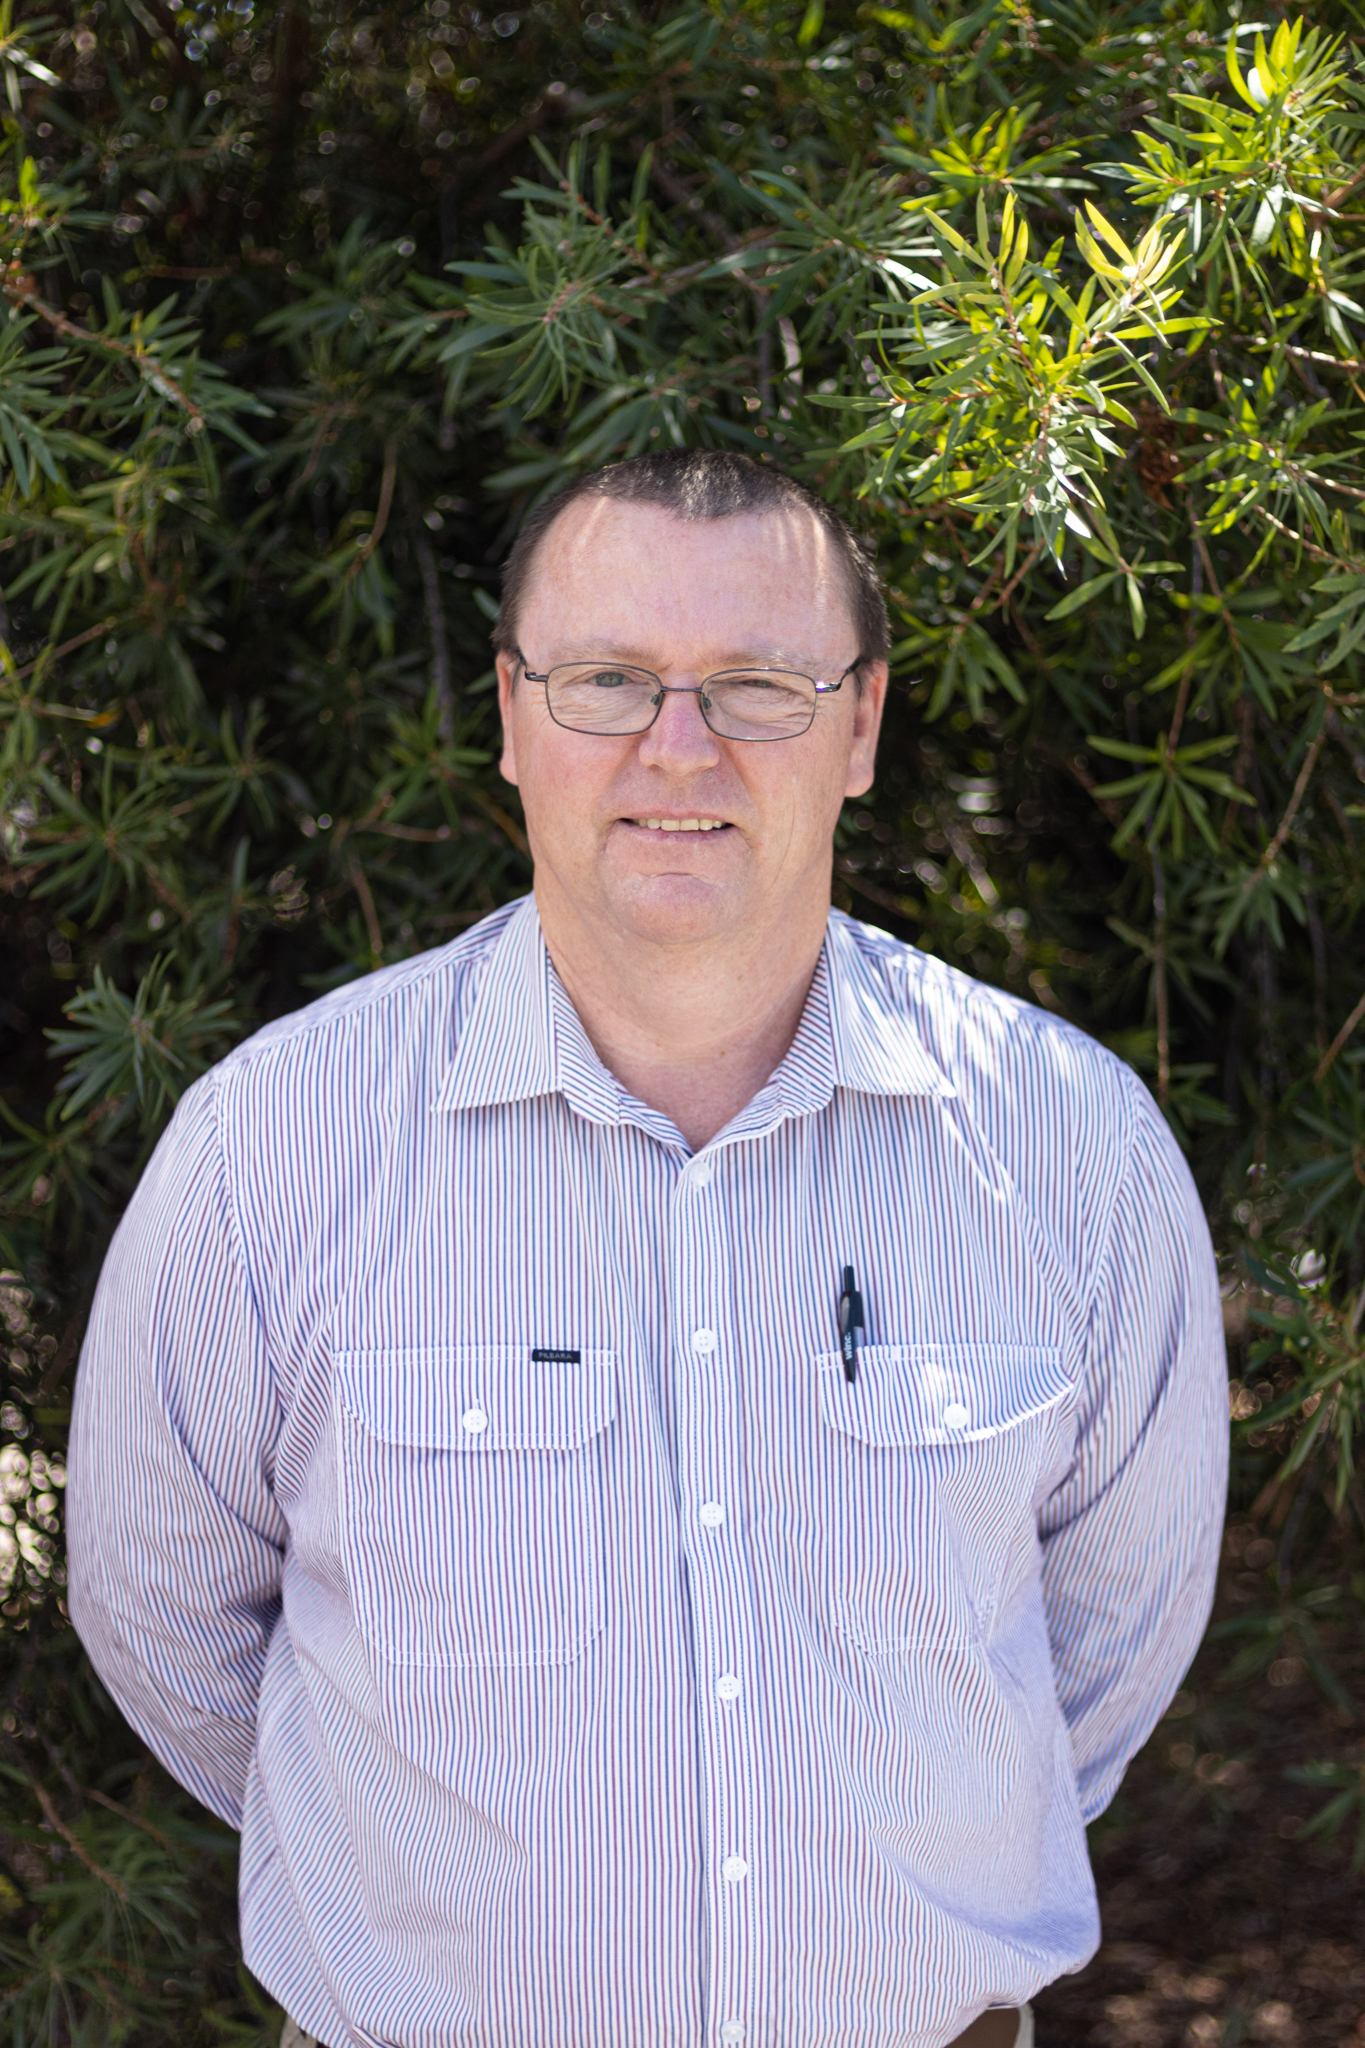 Richard Hardwick - General Manager of Business Services at Challenge Community Services. Richard wears a blue business shirt and stands in front of some greenery.